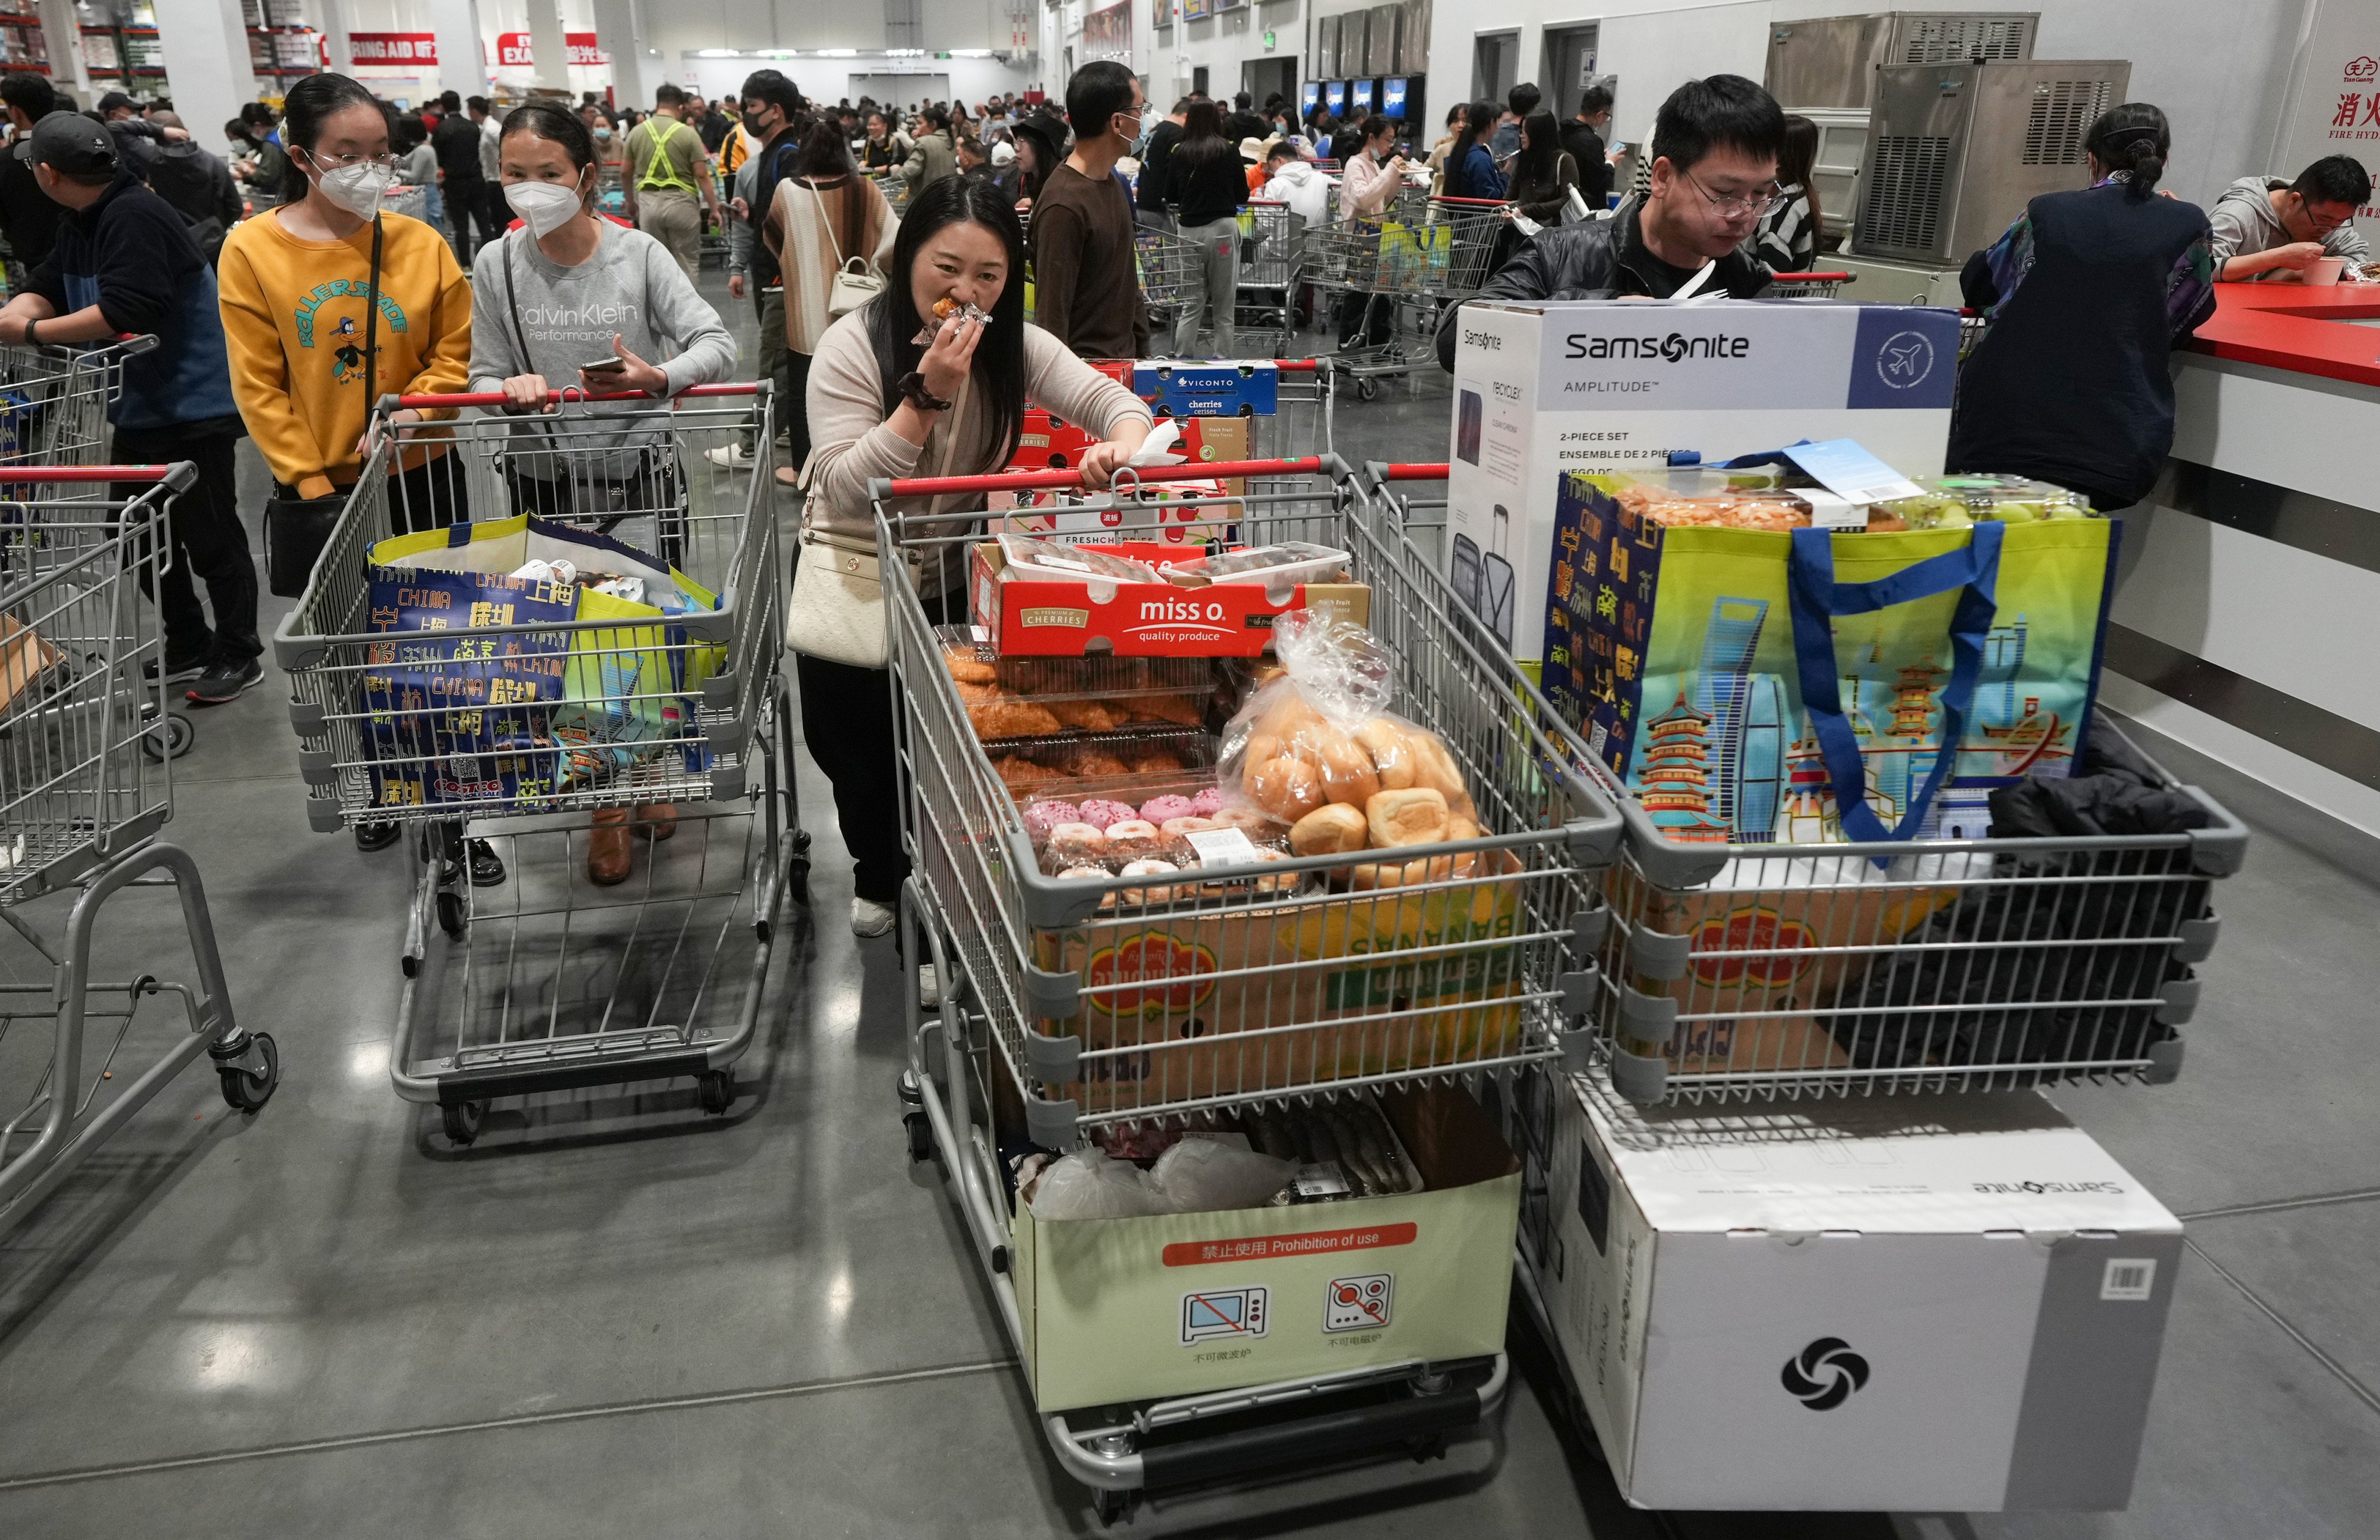 Deep Dive: Shenzhen's megastores attracting shoppers eager for bargains –  can Hong Kong retailers compete? - YP